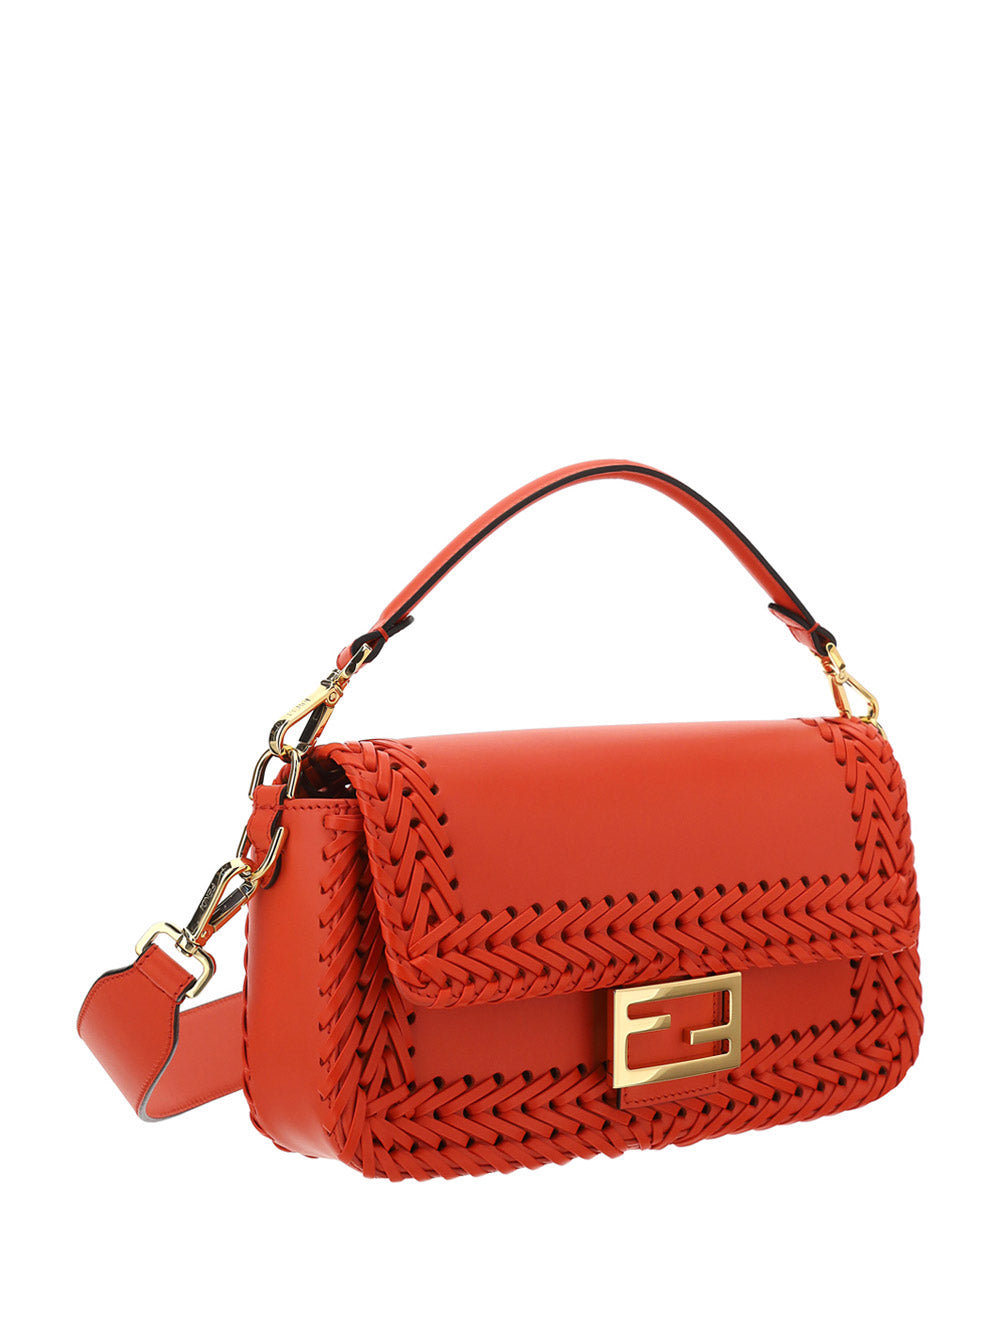 Medium Baguette Woven Leather Bag - Red